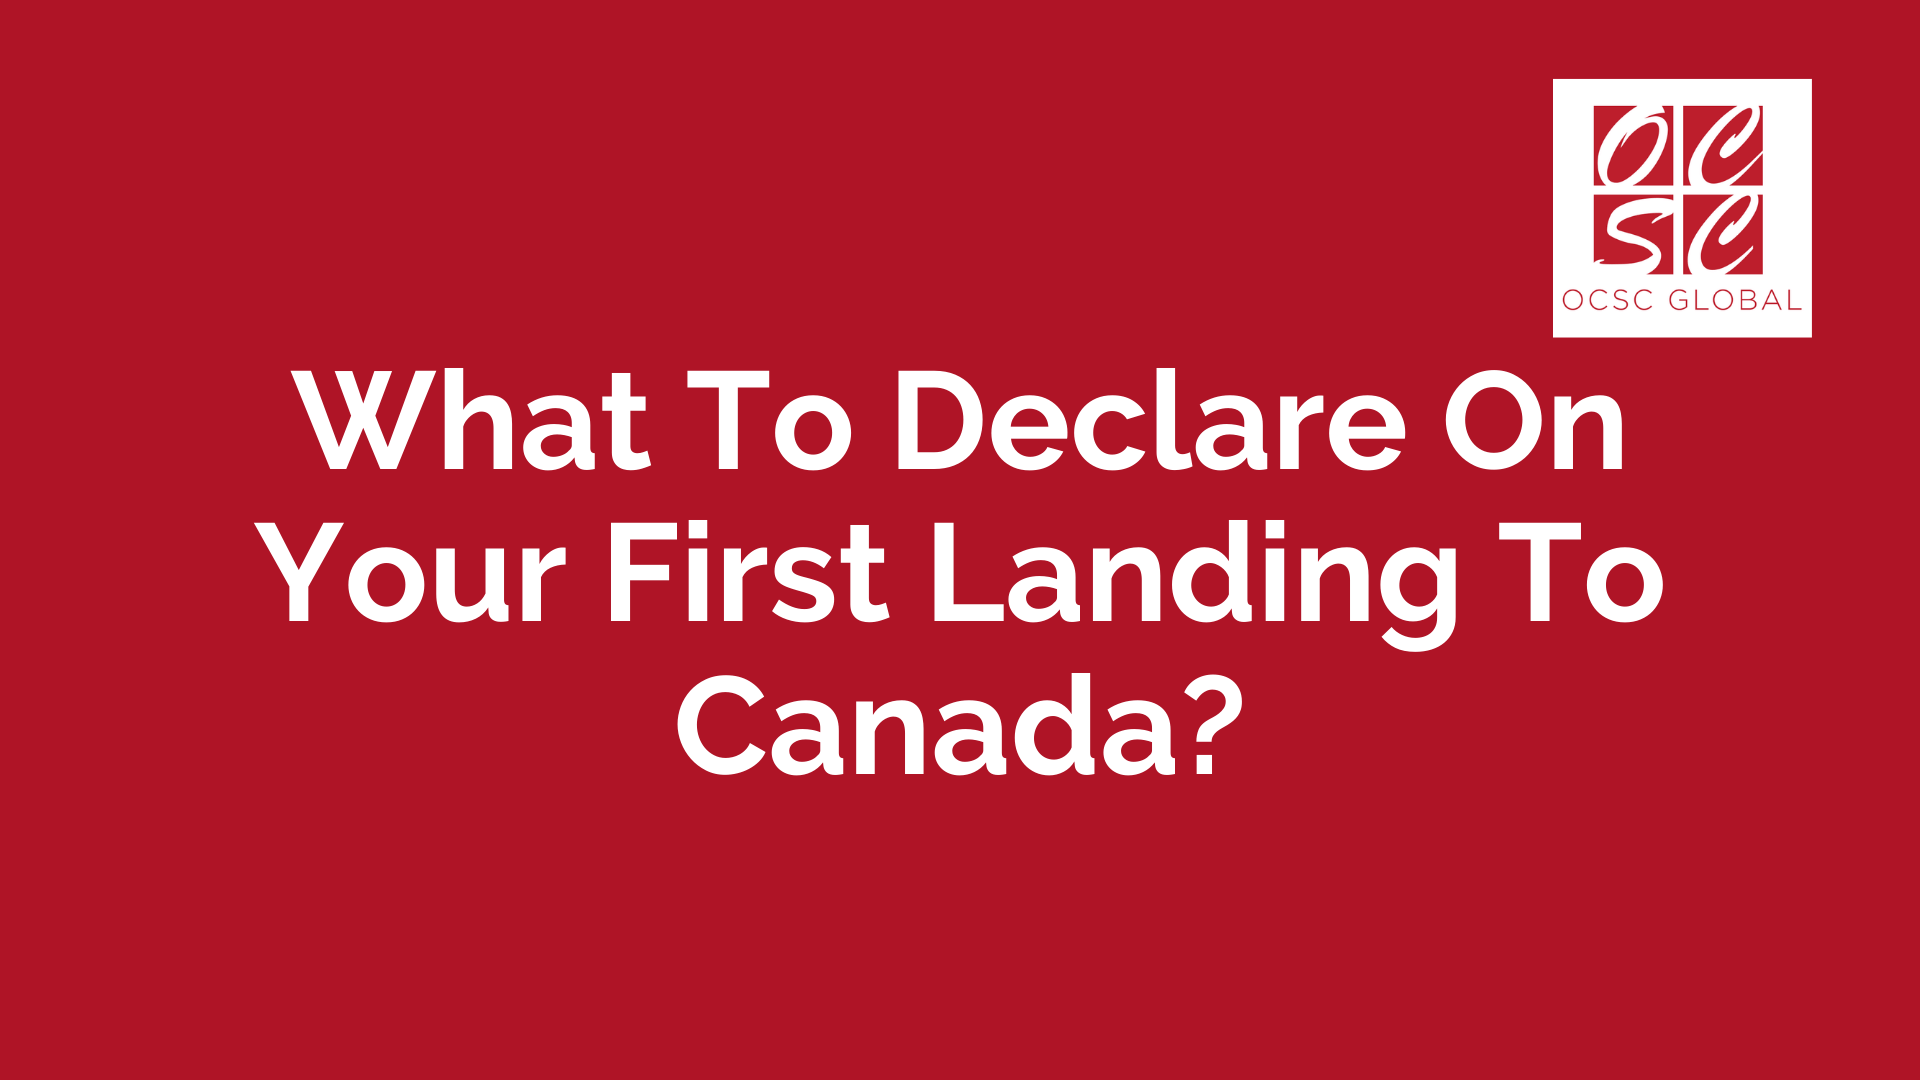 First Landing To Canada